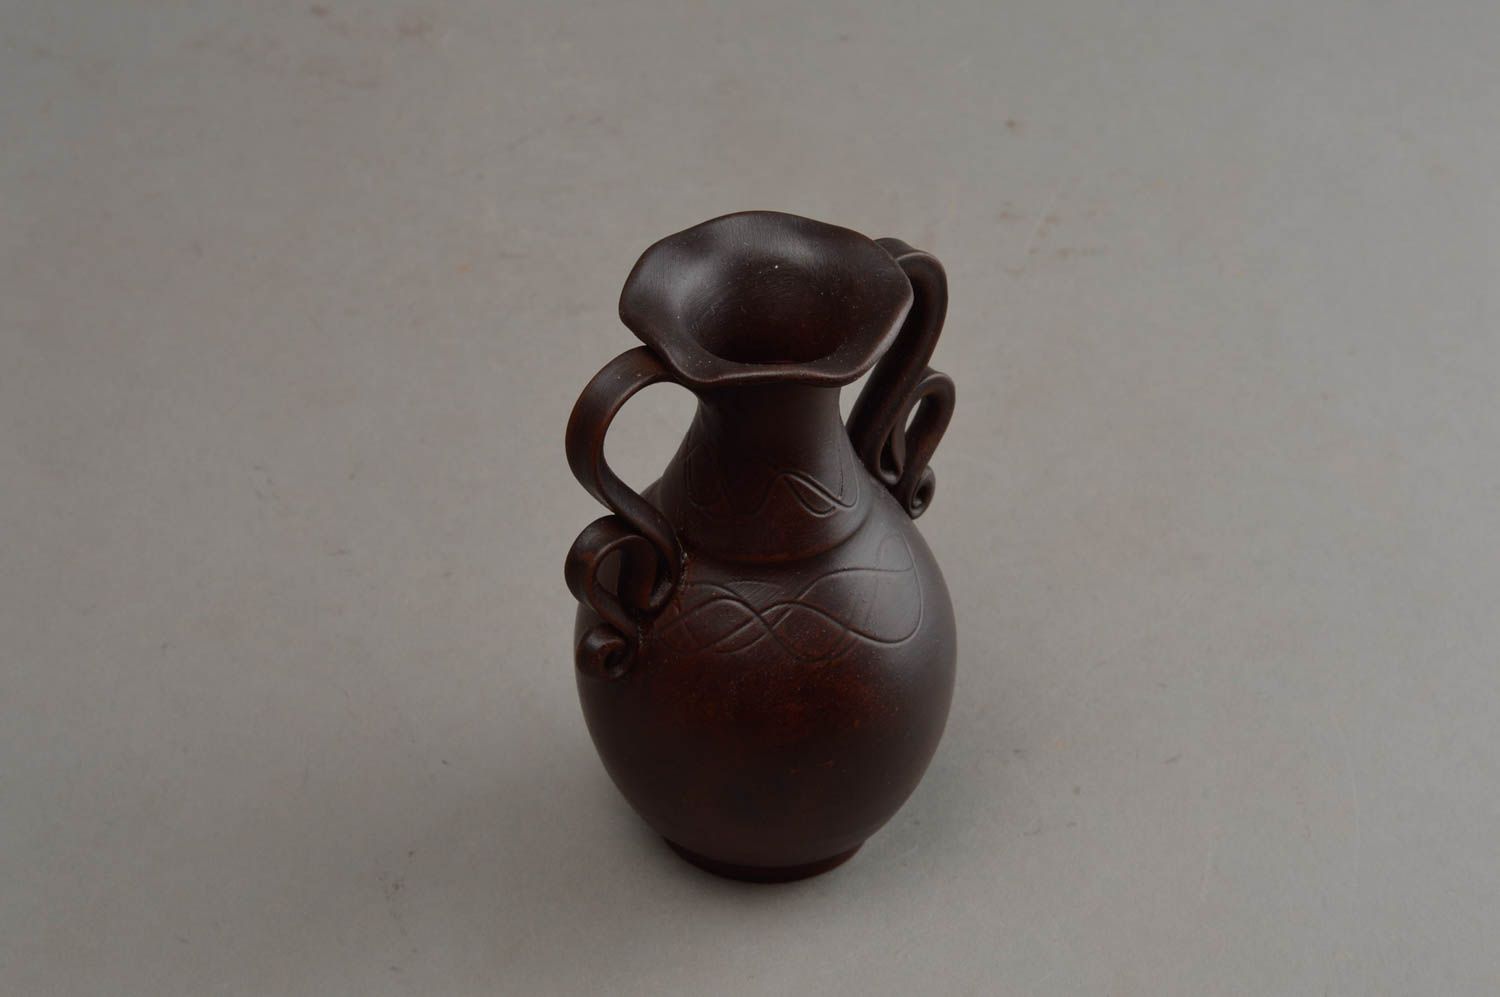 20 oz brown ceramic clay flower vase, wine carafe with two handles 5 inches, 0,5 lb photo 8